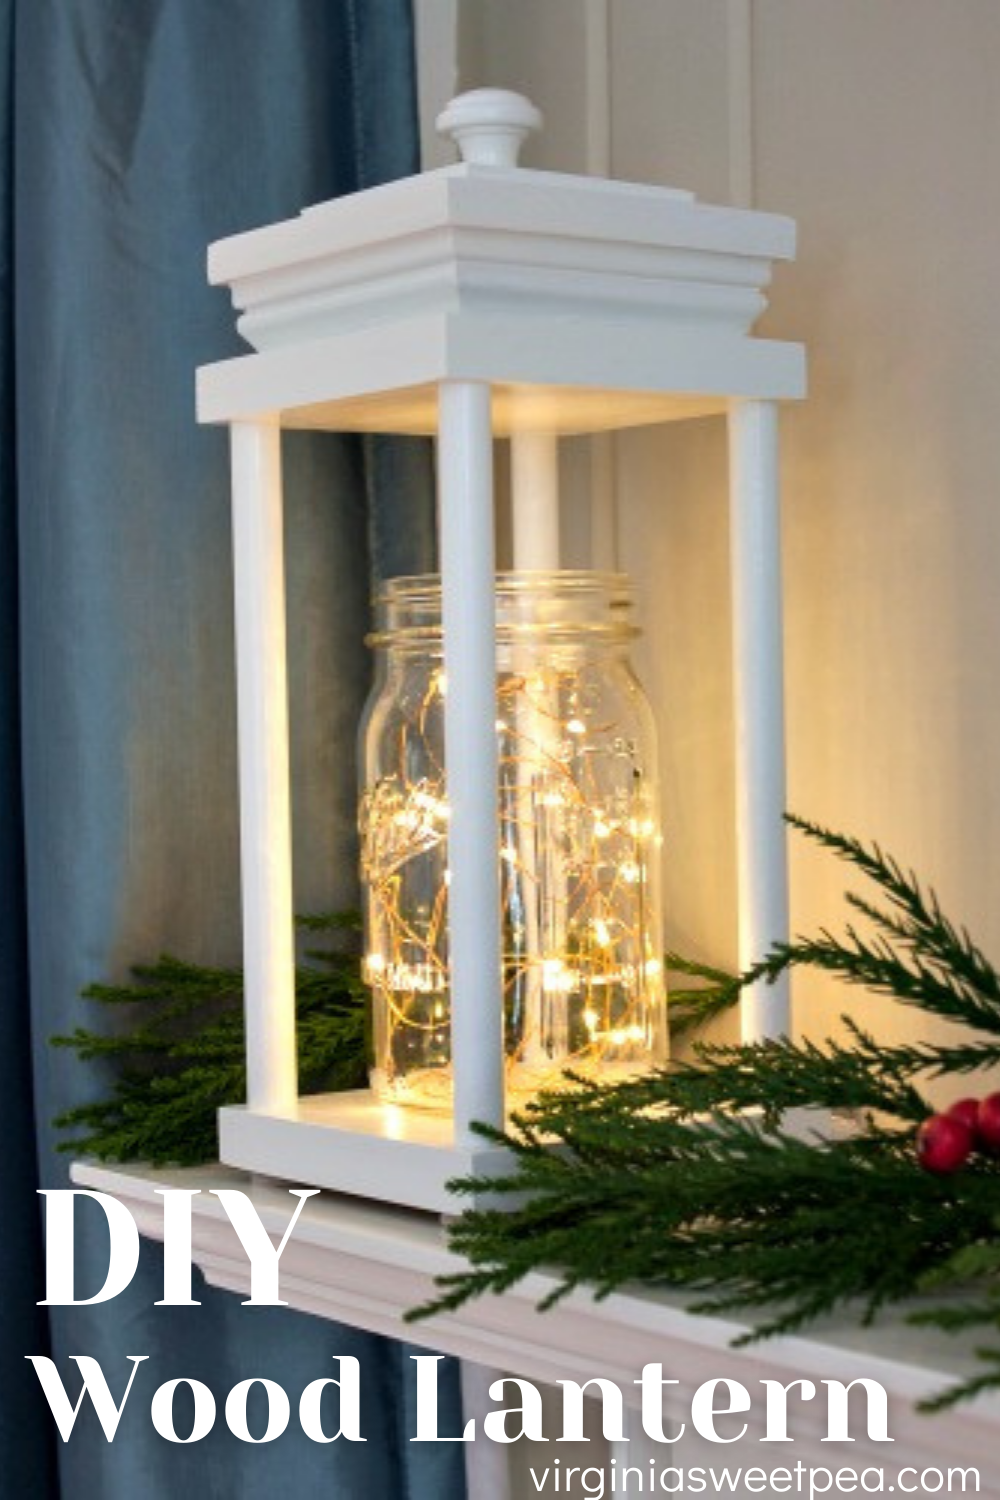 Handmade wood lantern on a mantel decorated for Christmas